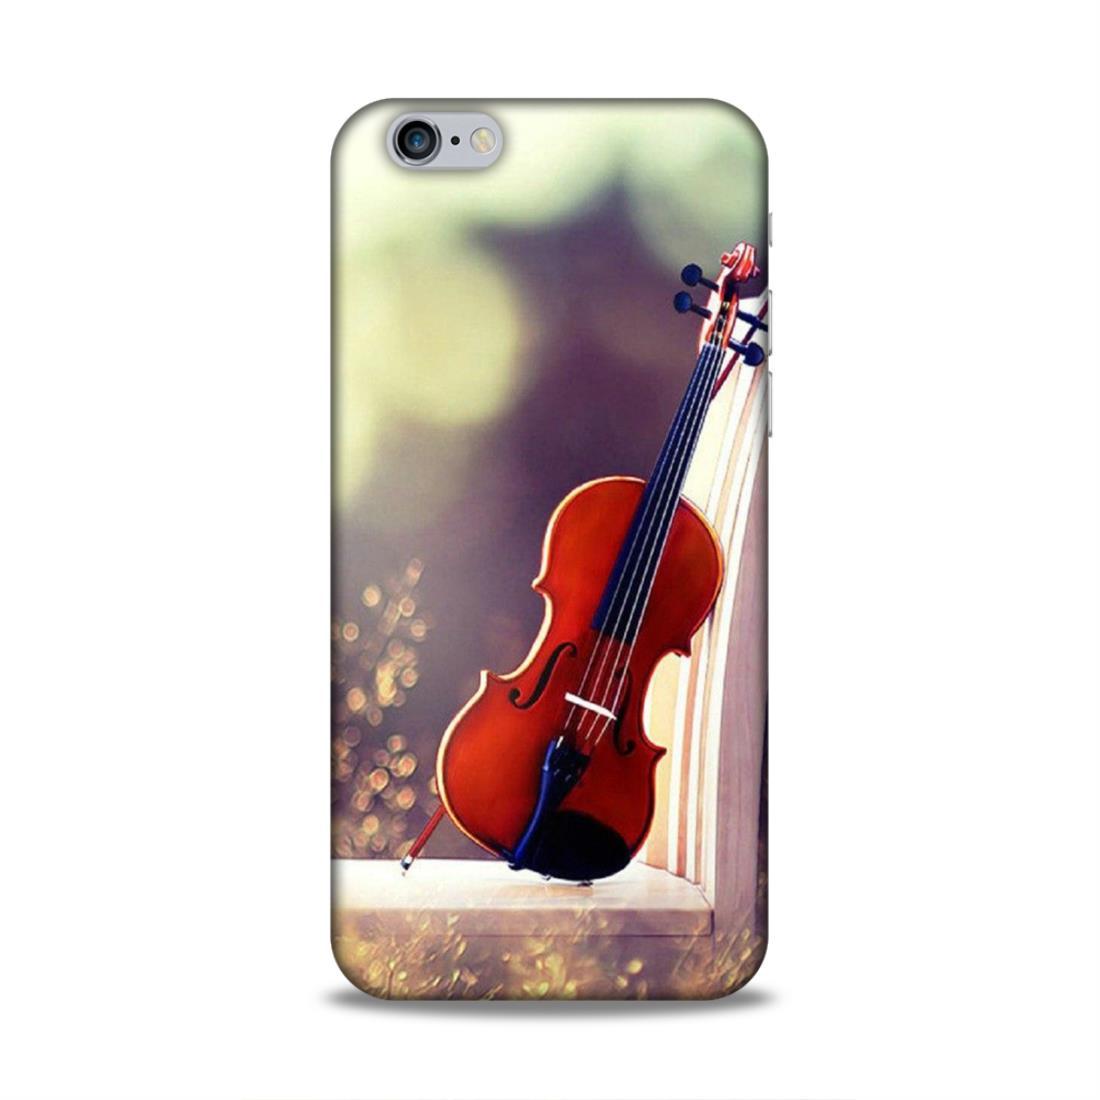 Guitar Lover iPhone 6 Phone Back Case